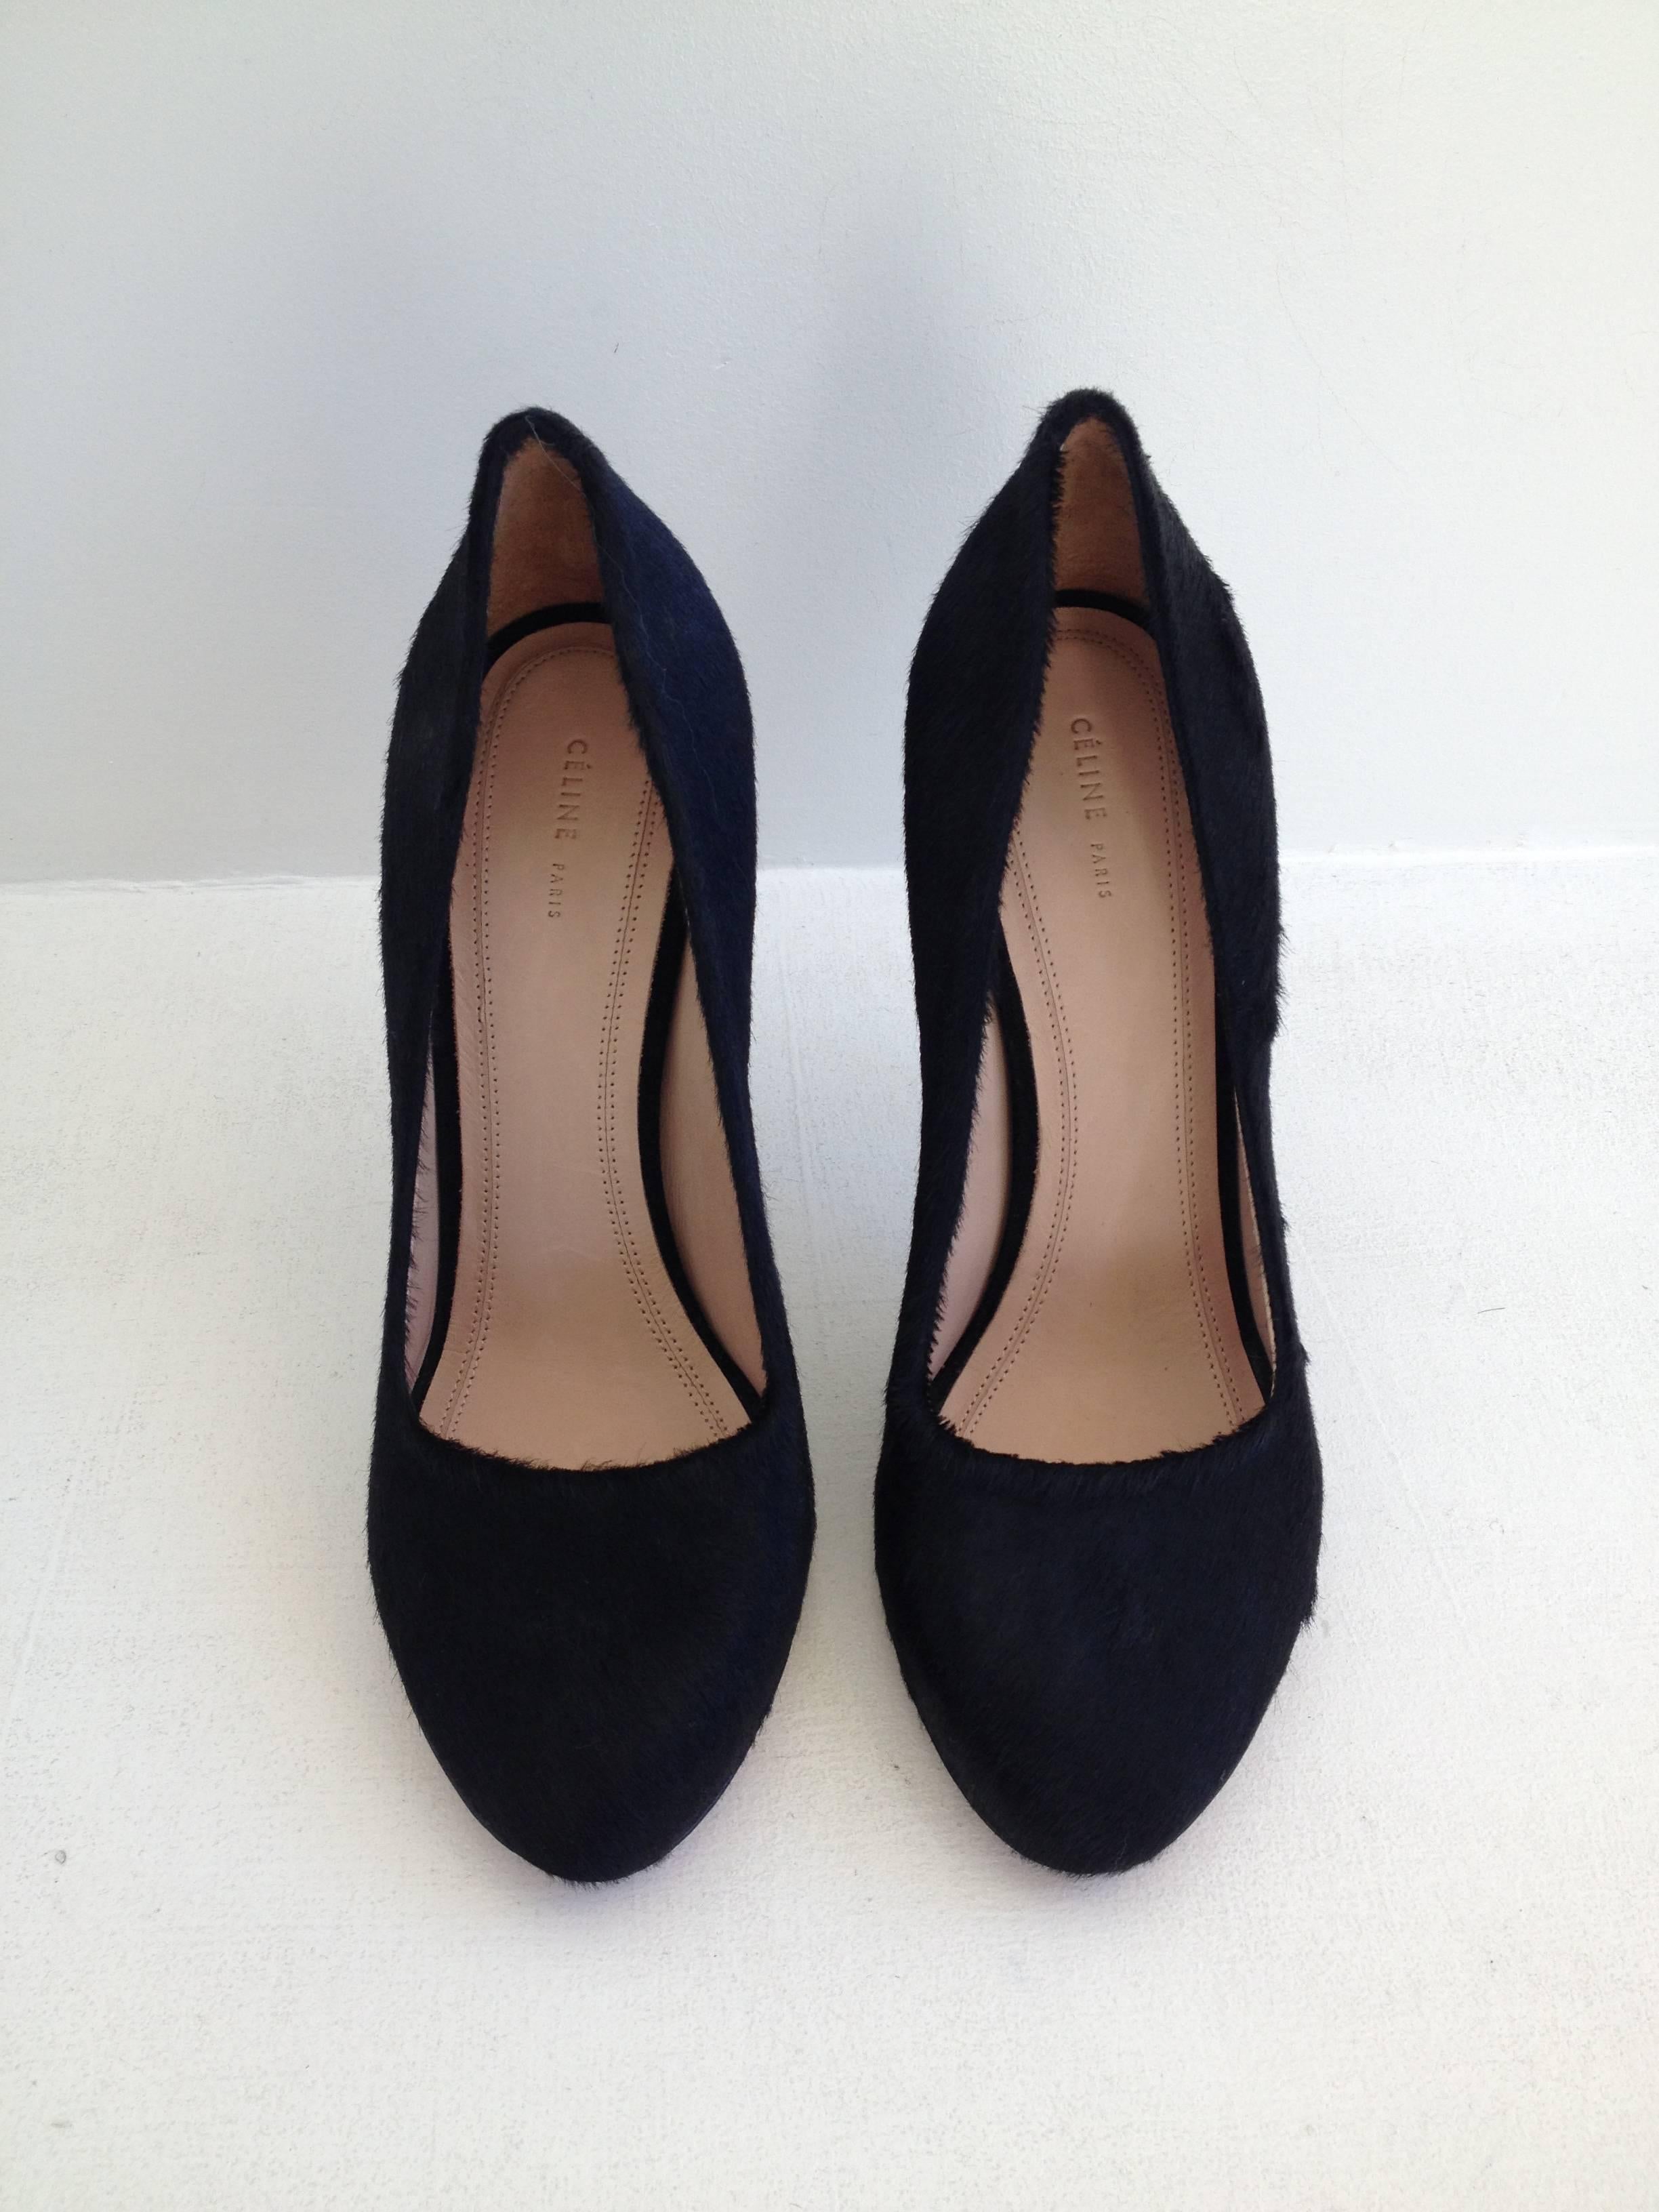 Simply gorgeous. Ultra sleek and cool black ponyhair covers the body of these classically shaped Celine pumps, which feature a 4.25 inch stiletto heel and square cut opening at the toe. Wild but elegant, these are the perfect Celine shoe!